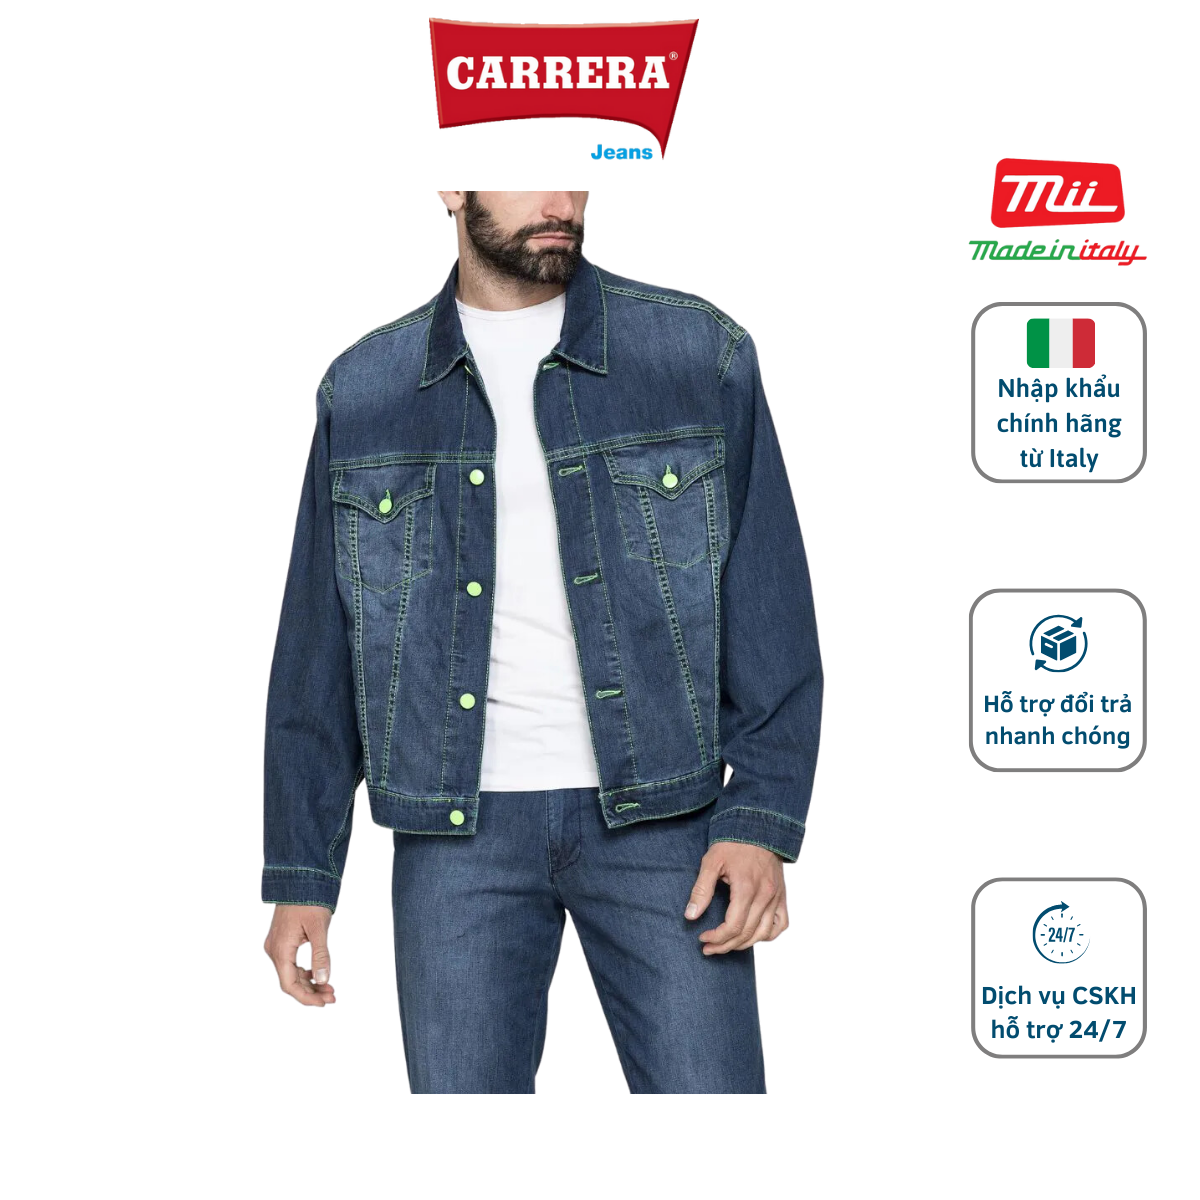 Mens denim jackets with blue color-Carrera Jeans